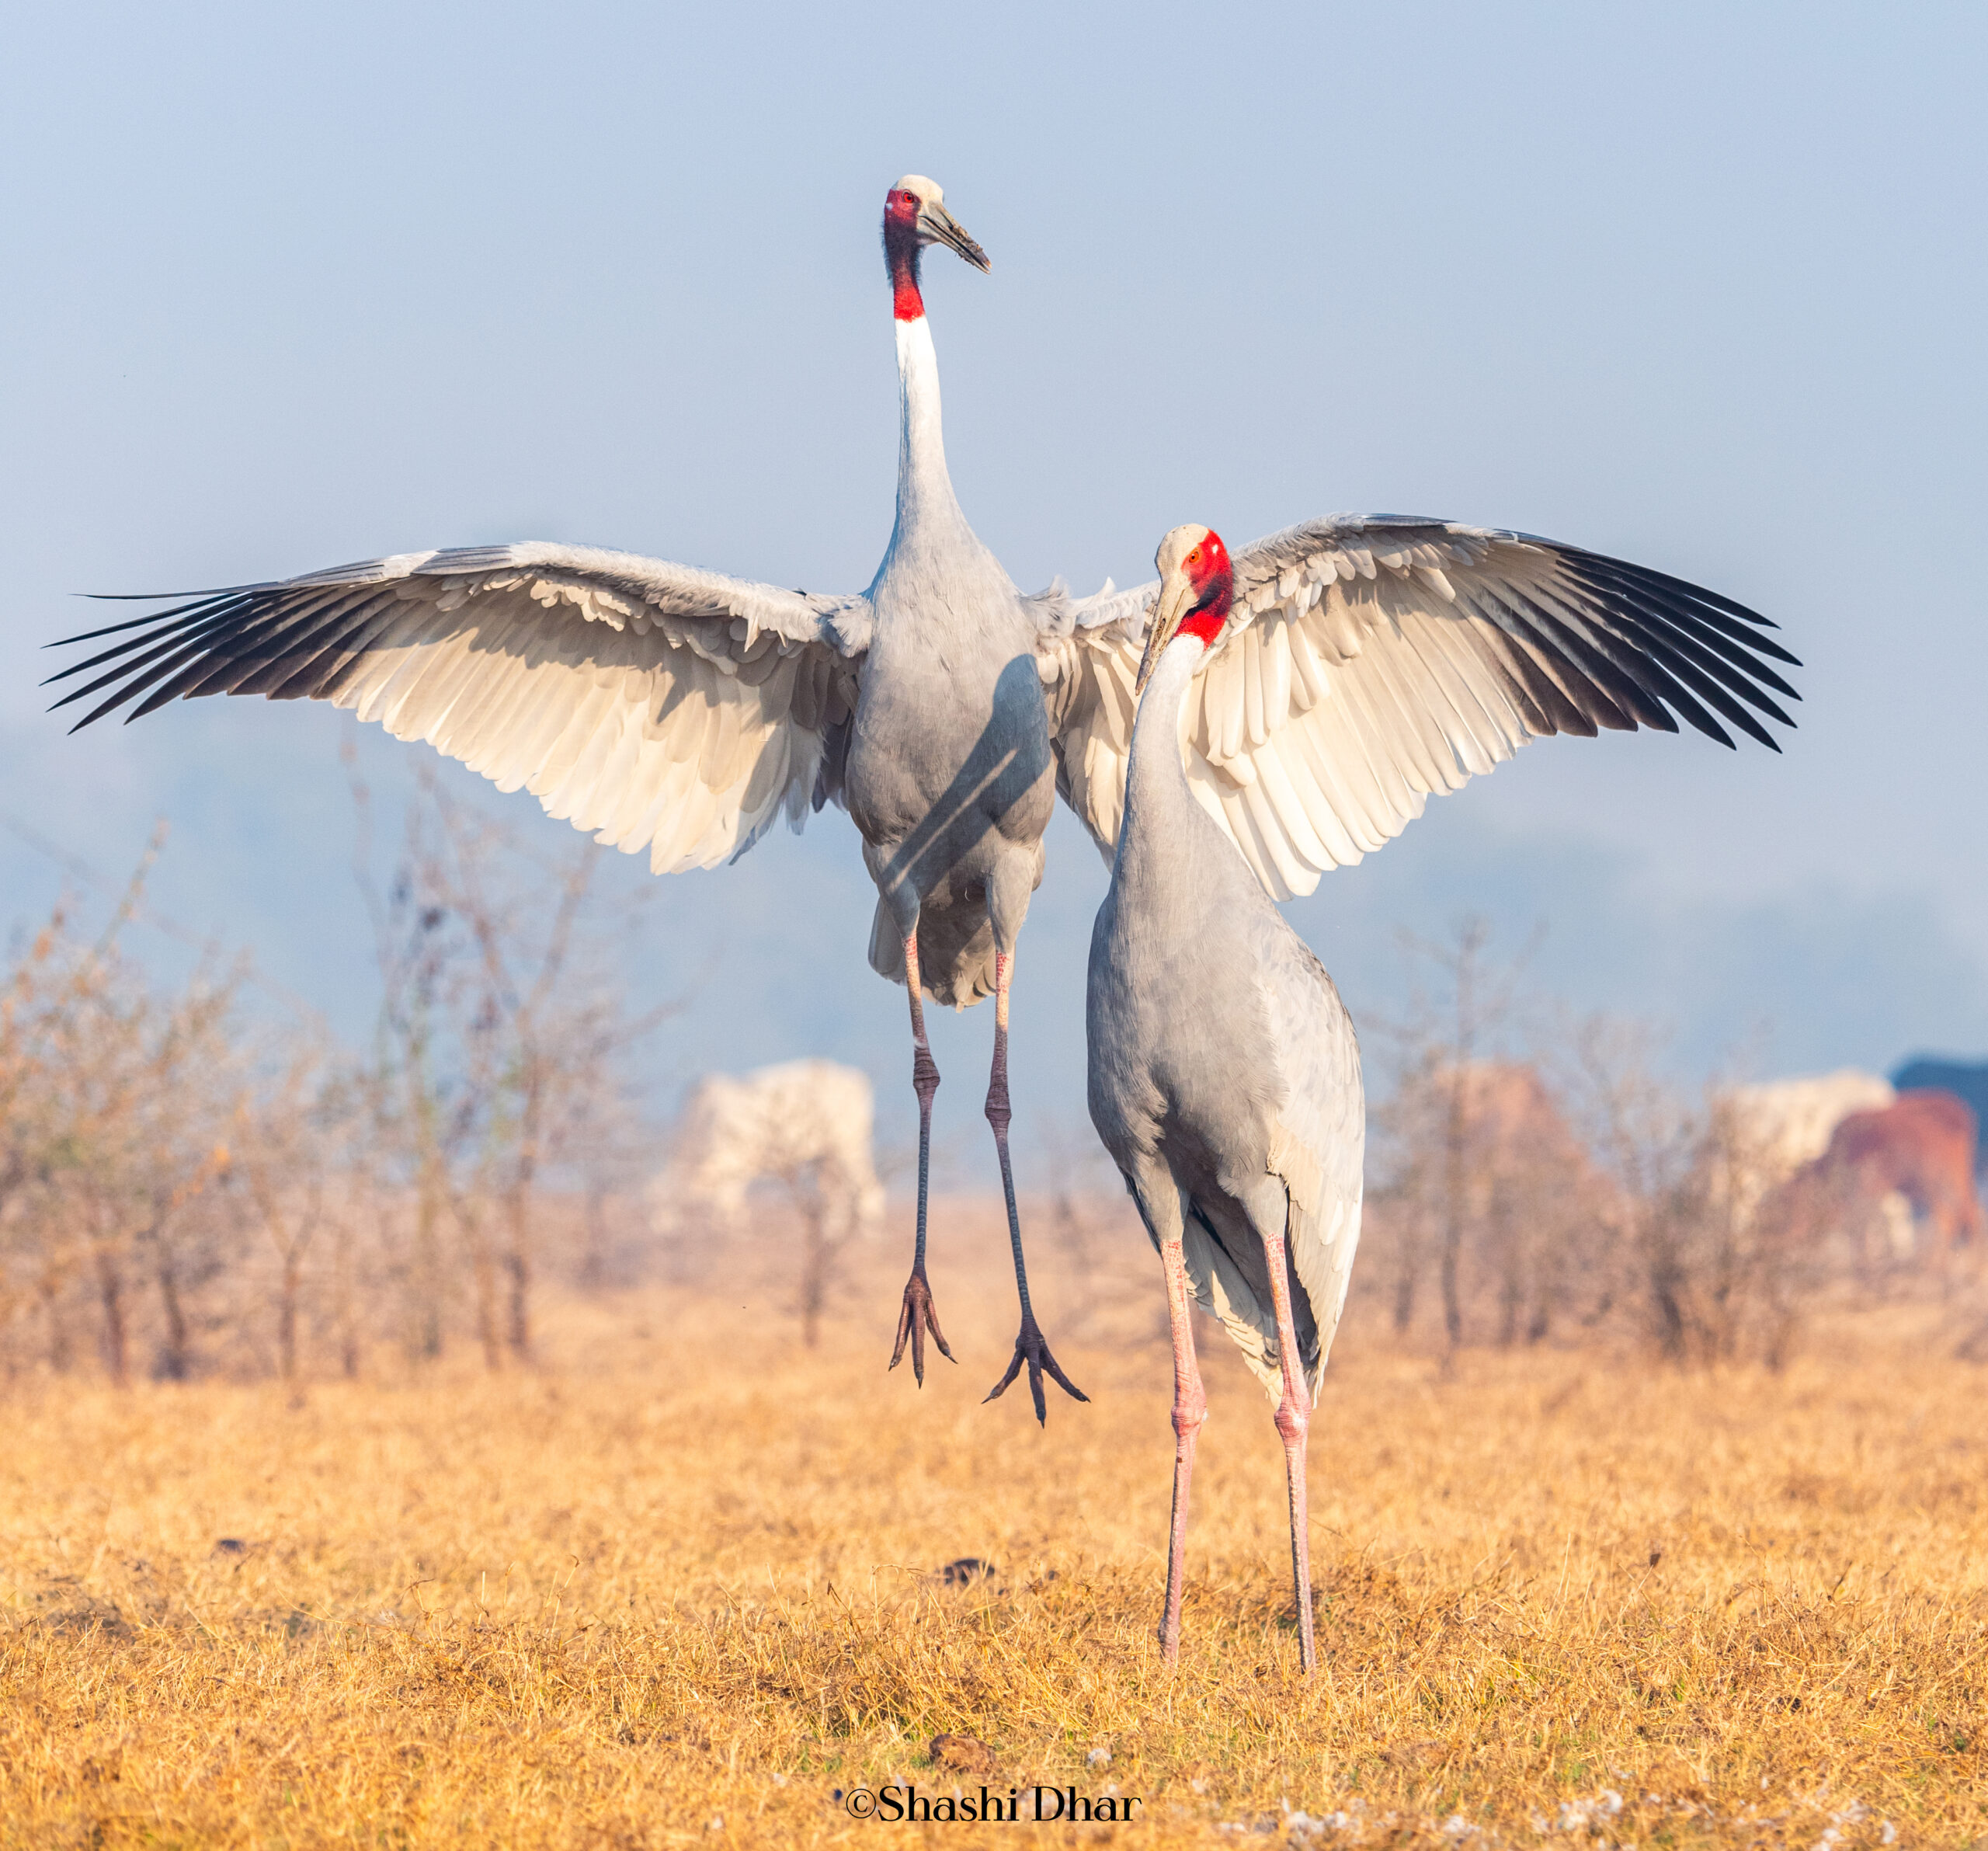 "Two majestic Sarus Cranes in a lush, green field under a clear blue sky. They are in the midst of their synchronized courtship dance, with wings gracefully spread wide, and long, slender necks arched towards each other."